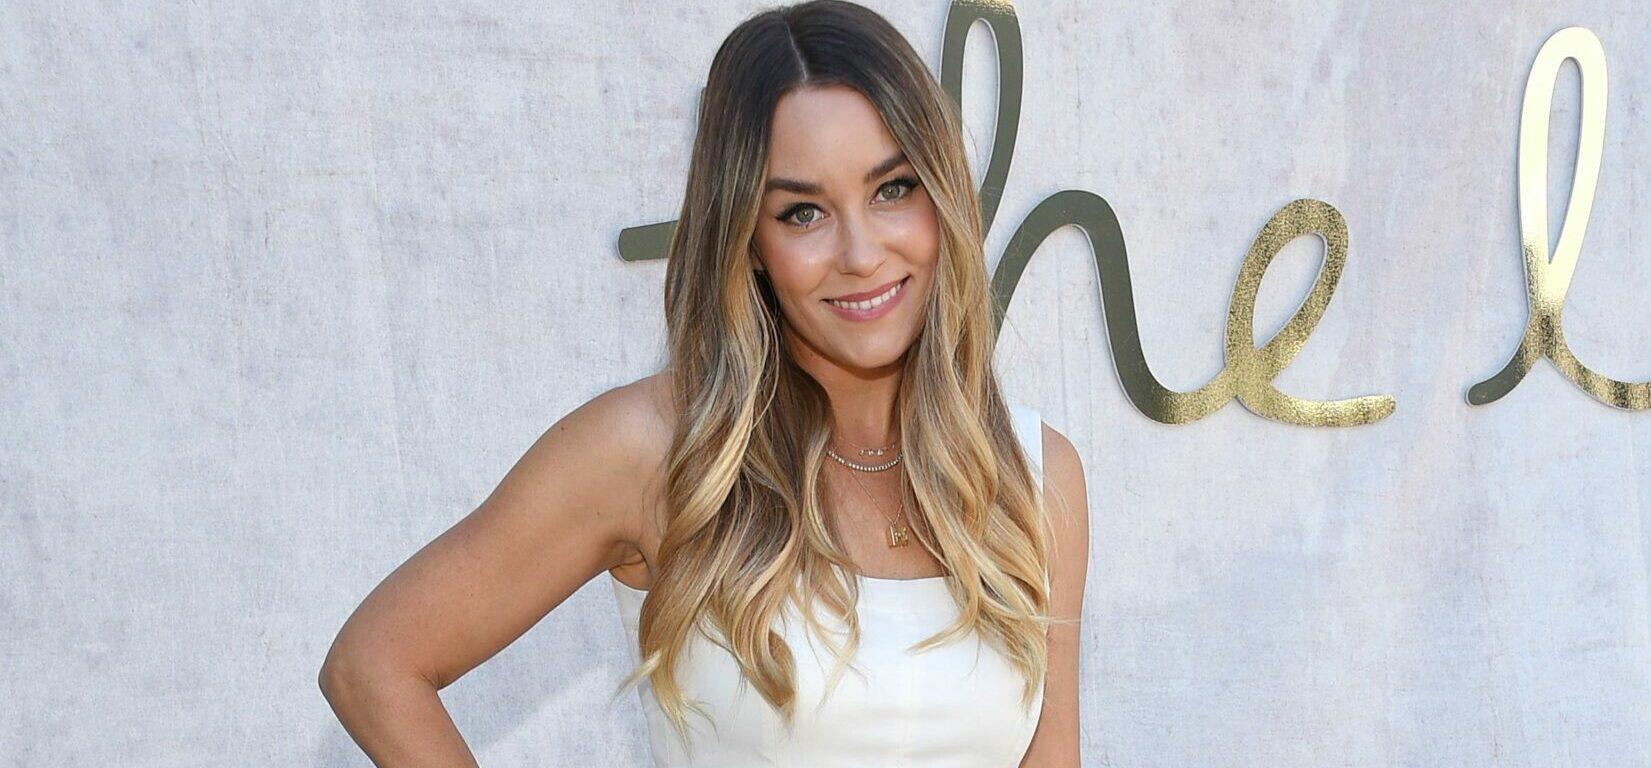 Lauren Conrad Talks Head-to-Toe Fashion Regrets, and Her Go-To